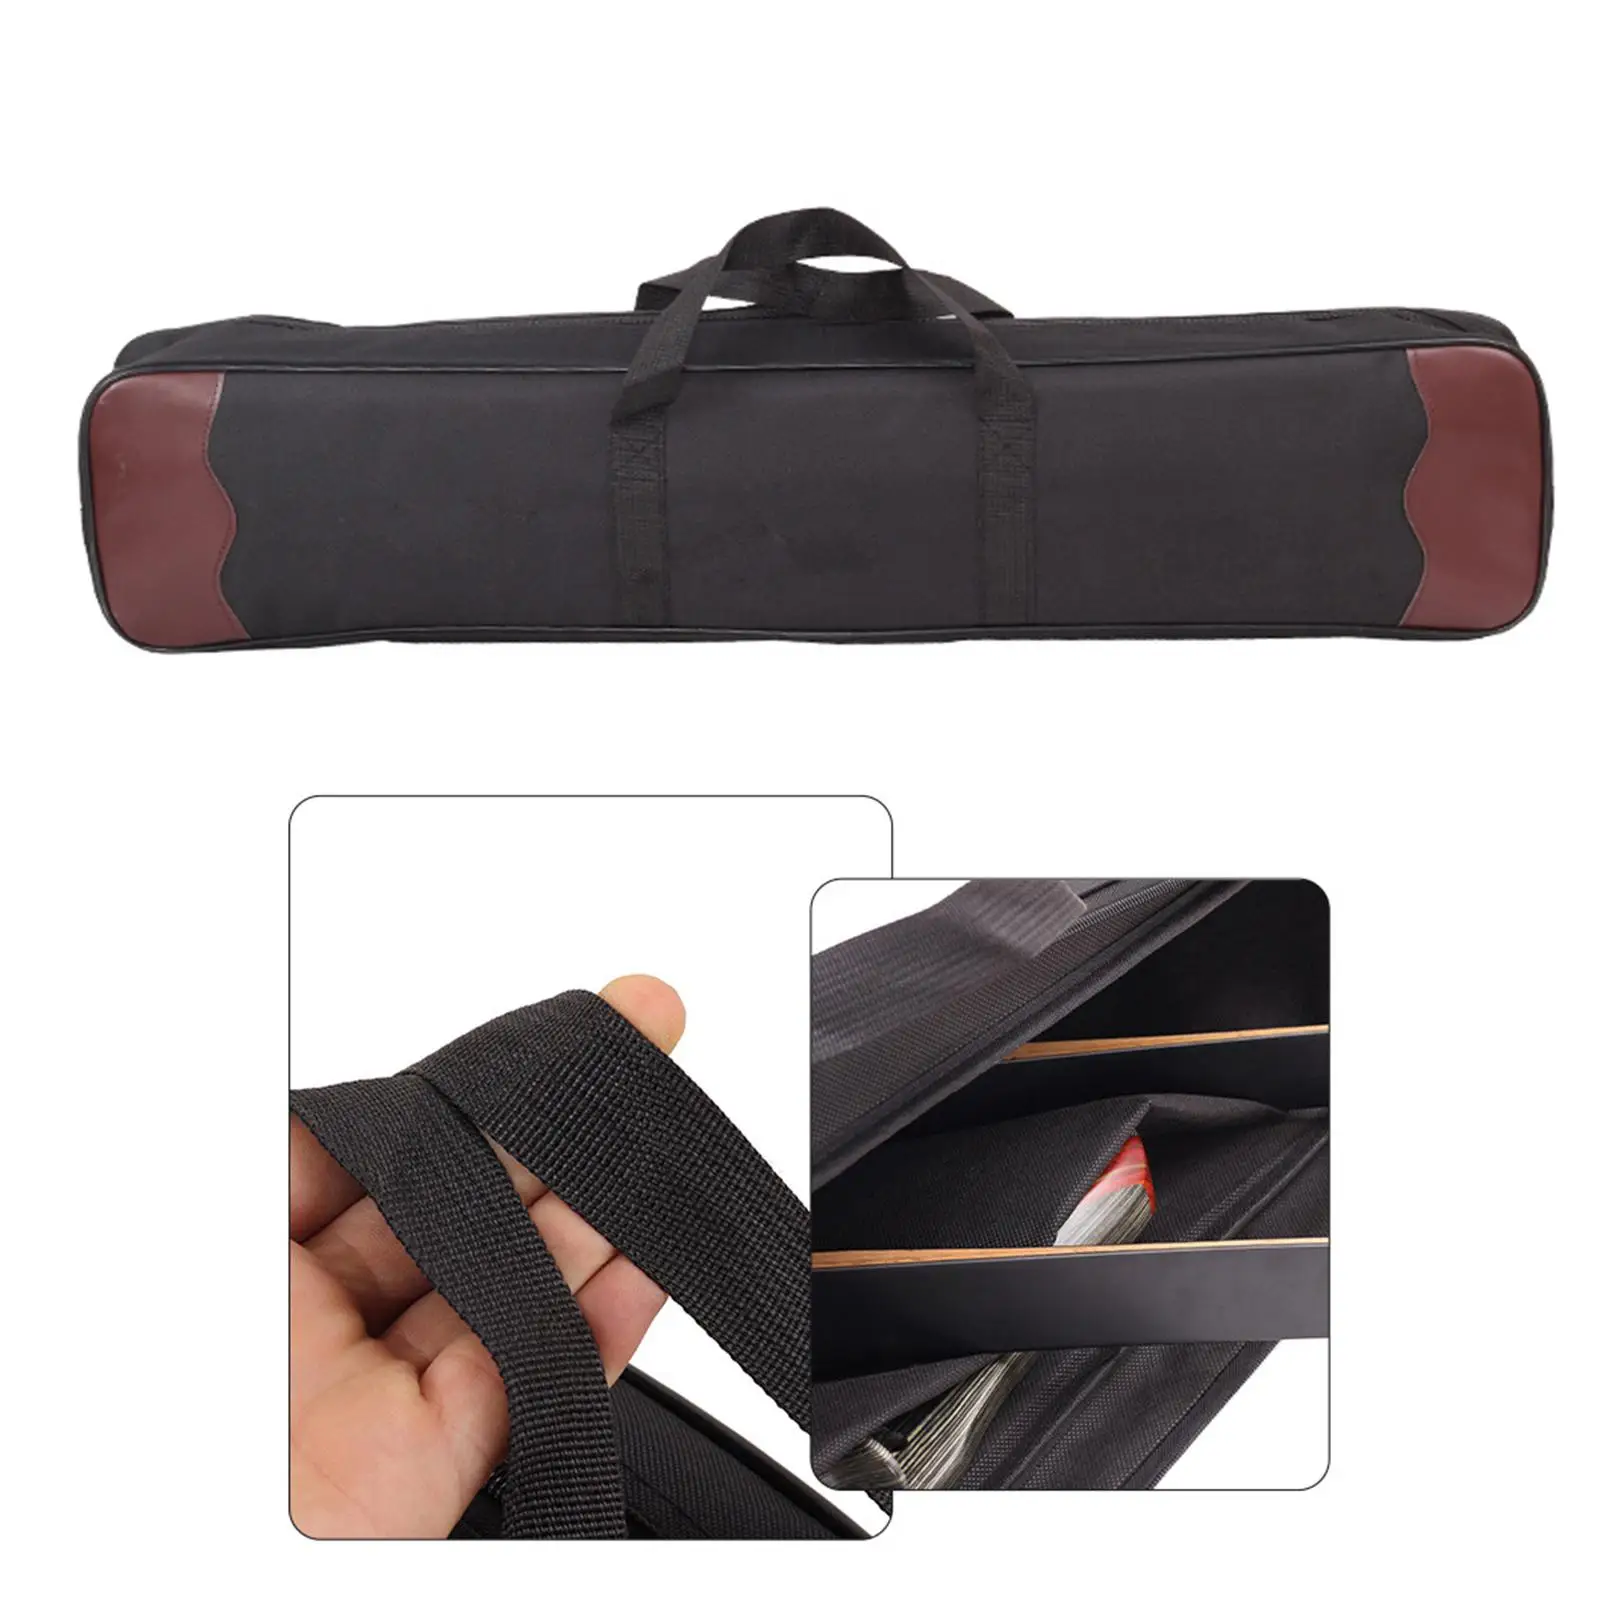 Adjustable Shoulder Strap Archery Arrow Quiver Pocket Multifunctional Traditional Oxford Cloth Bow Quiver for Target Practicing